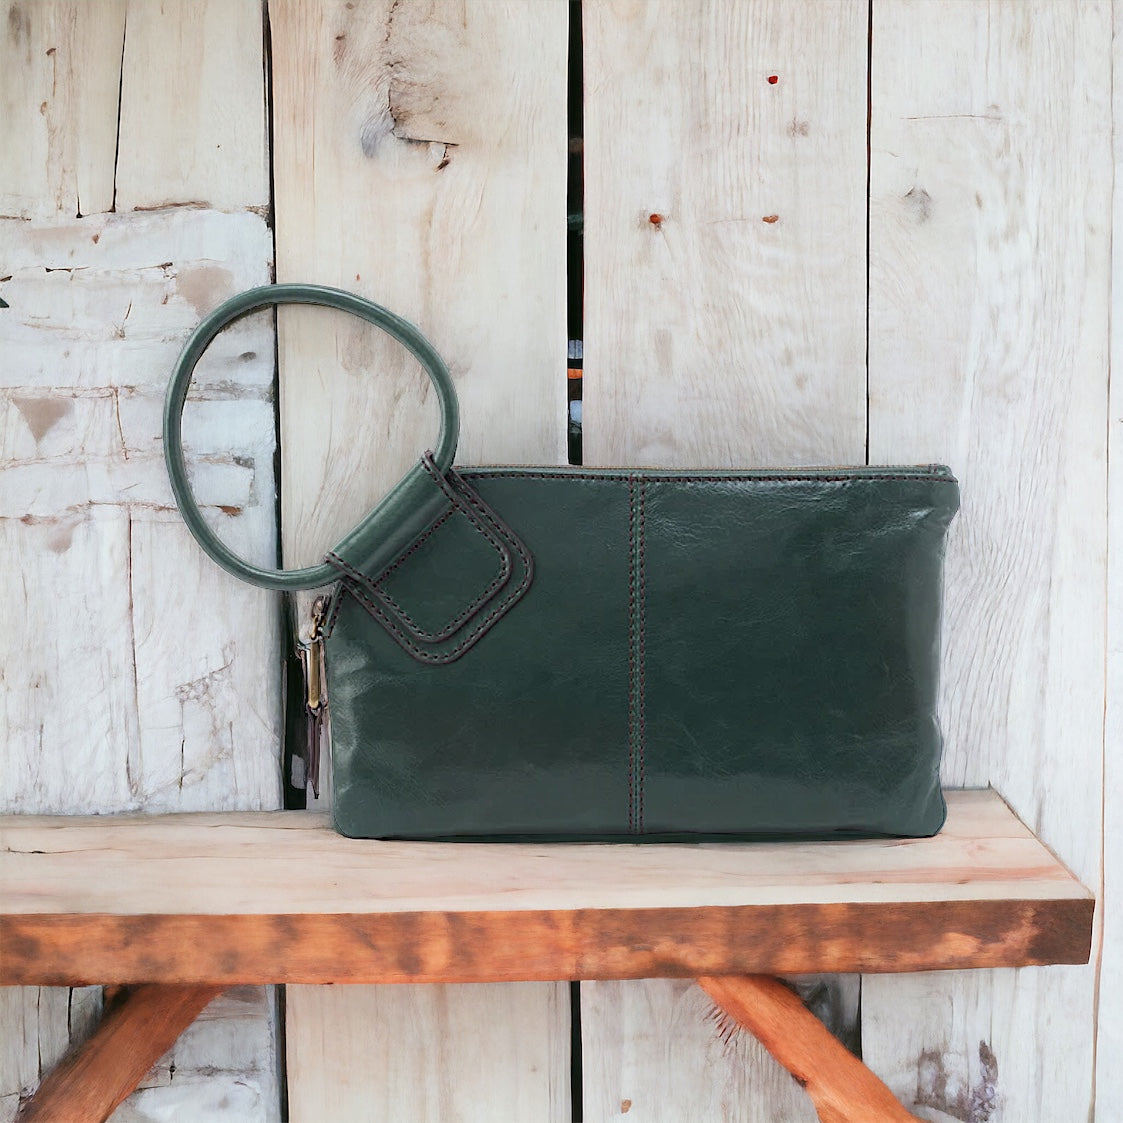 Sable Wristlet by HOBO in Sage Leaf - The Street Boutique 